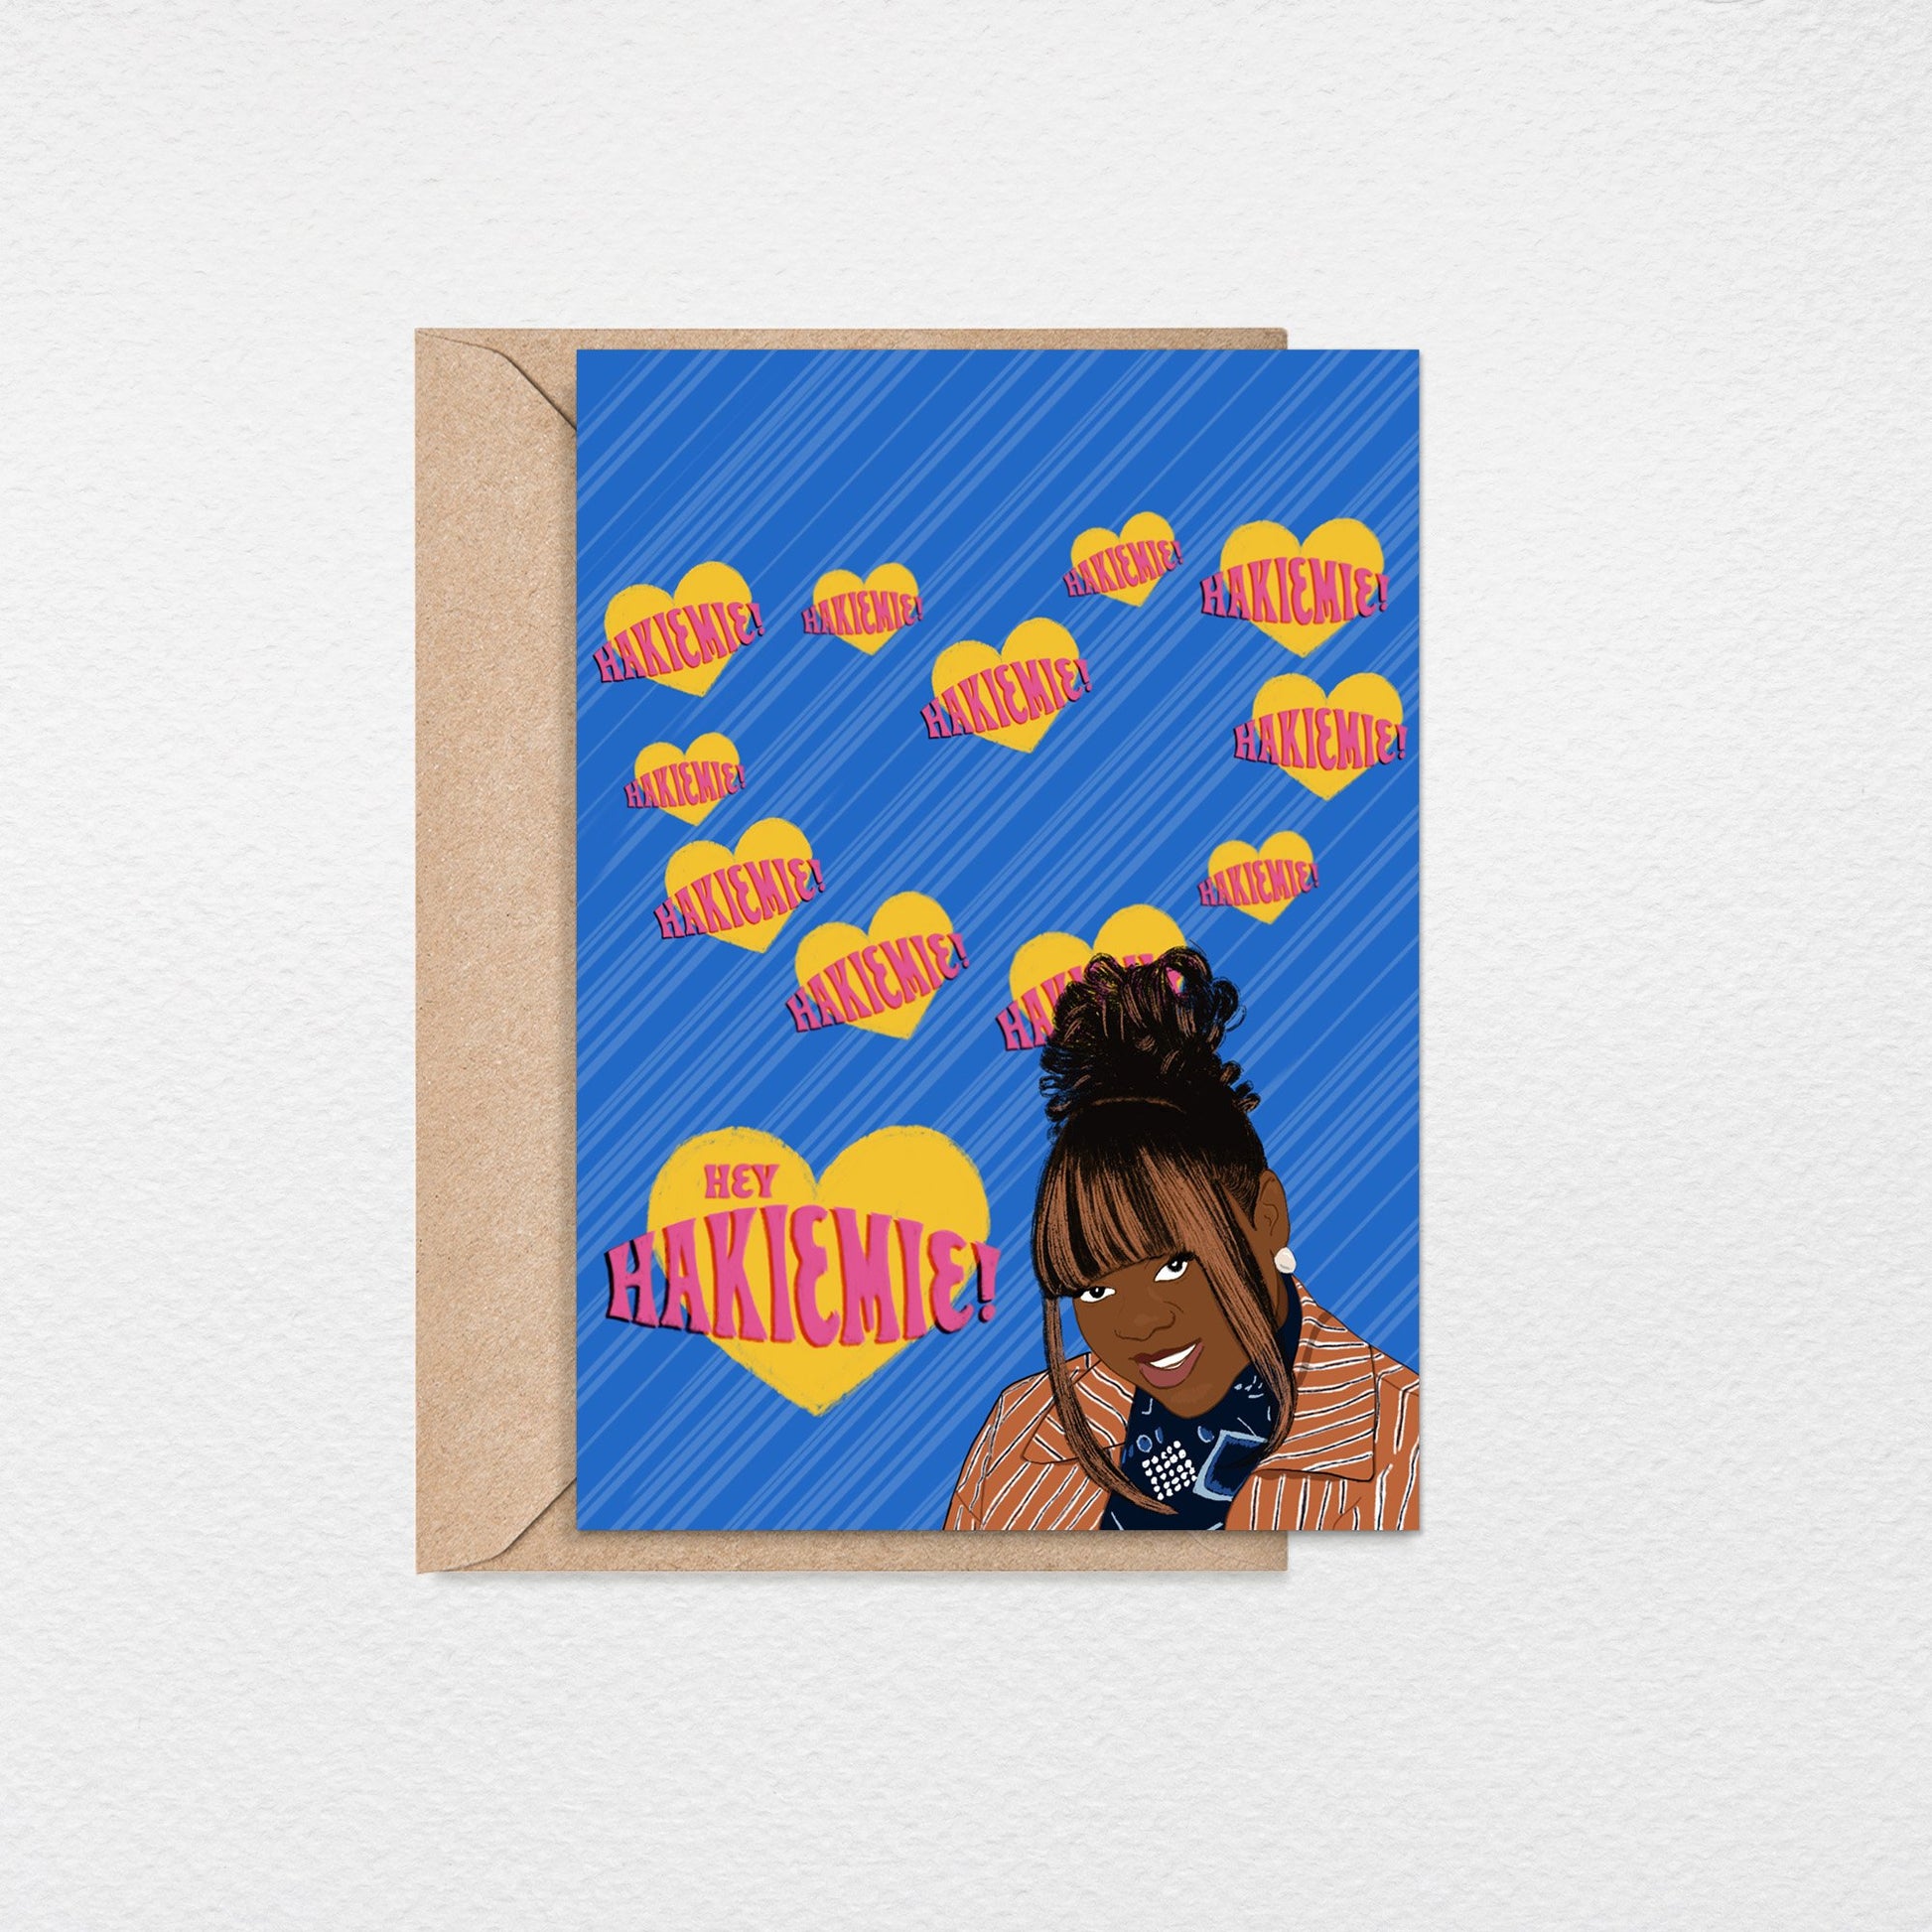 Hey Hakiemie 5x7” Kim Parker Moesha love valentines day greeting card from Goods Made By Digitrillnana, Ashley Fletcher. Perfect card for valentines day! Black Woman Owned.